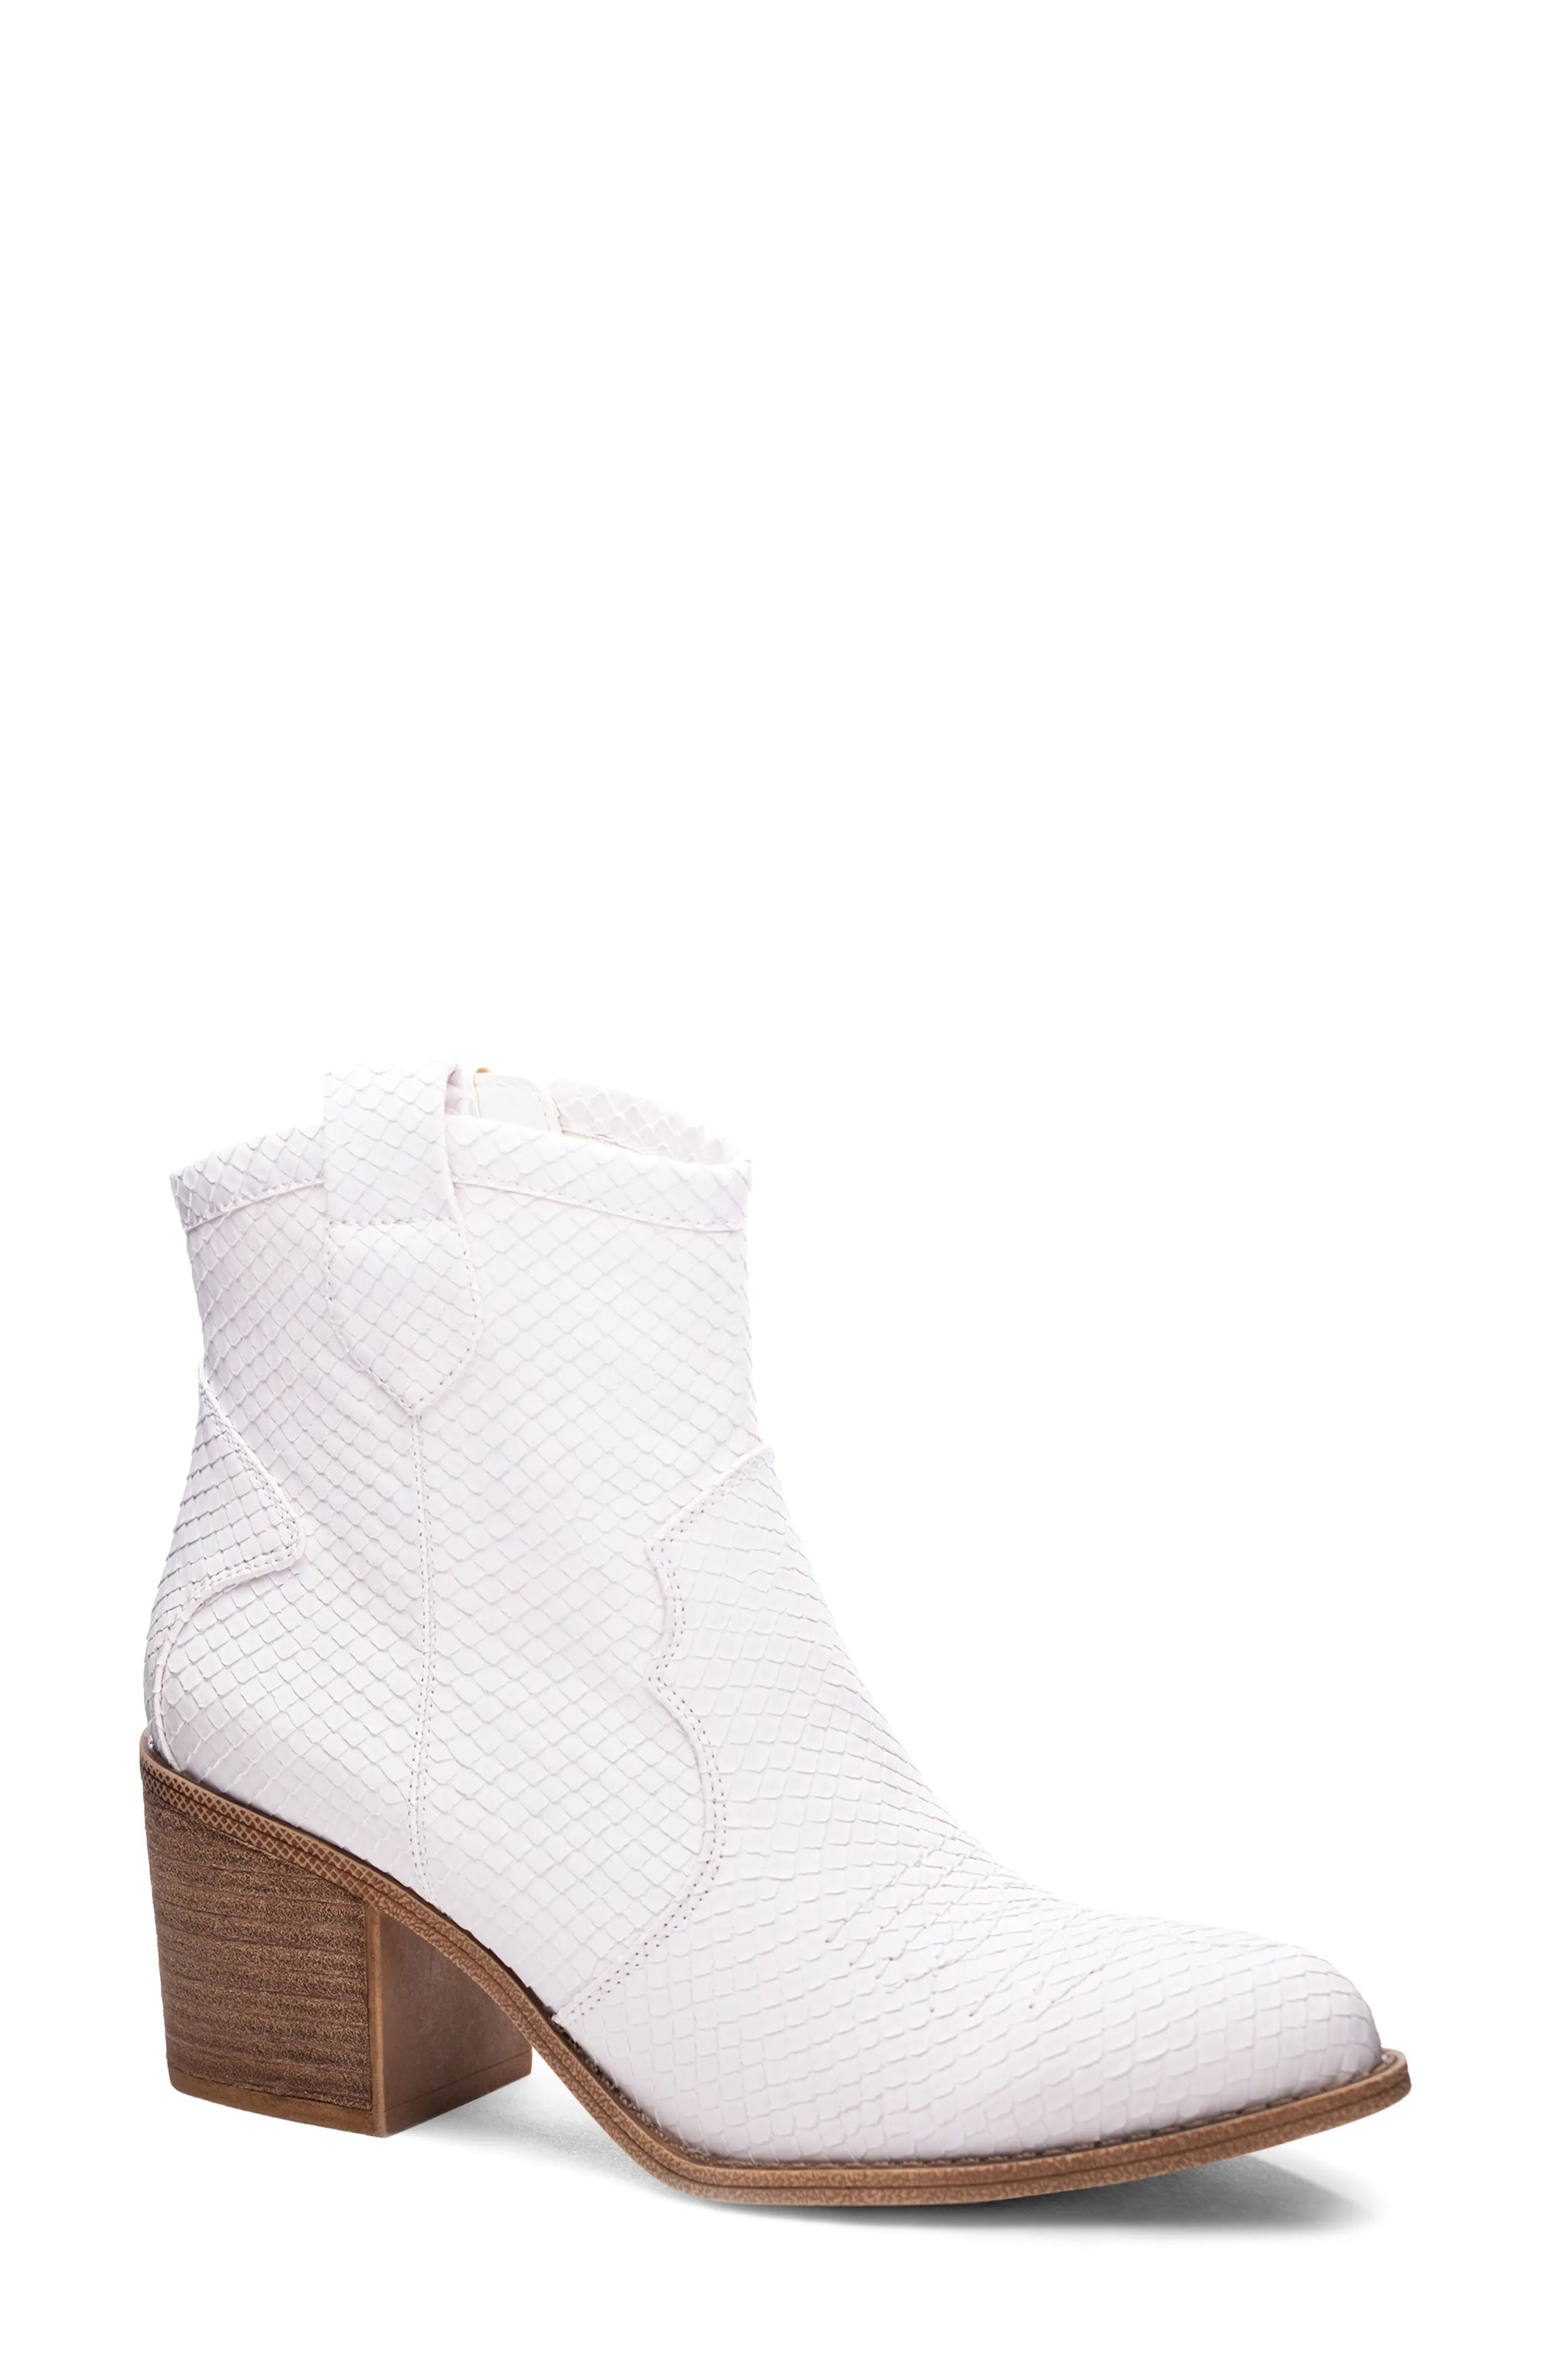 Women's Dirty Laundry Unite Western Bootie, Size 5 M - White | Nordstrom